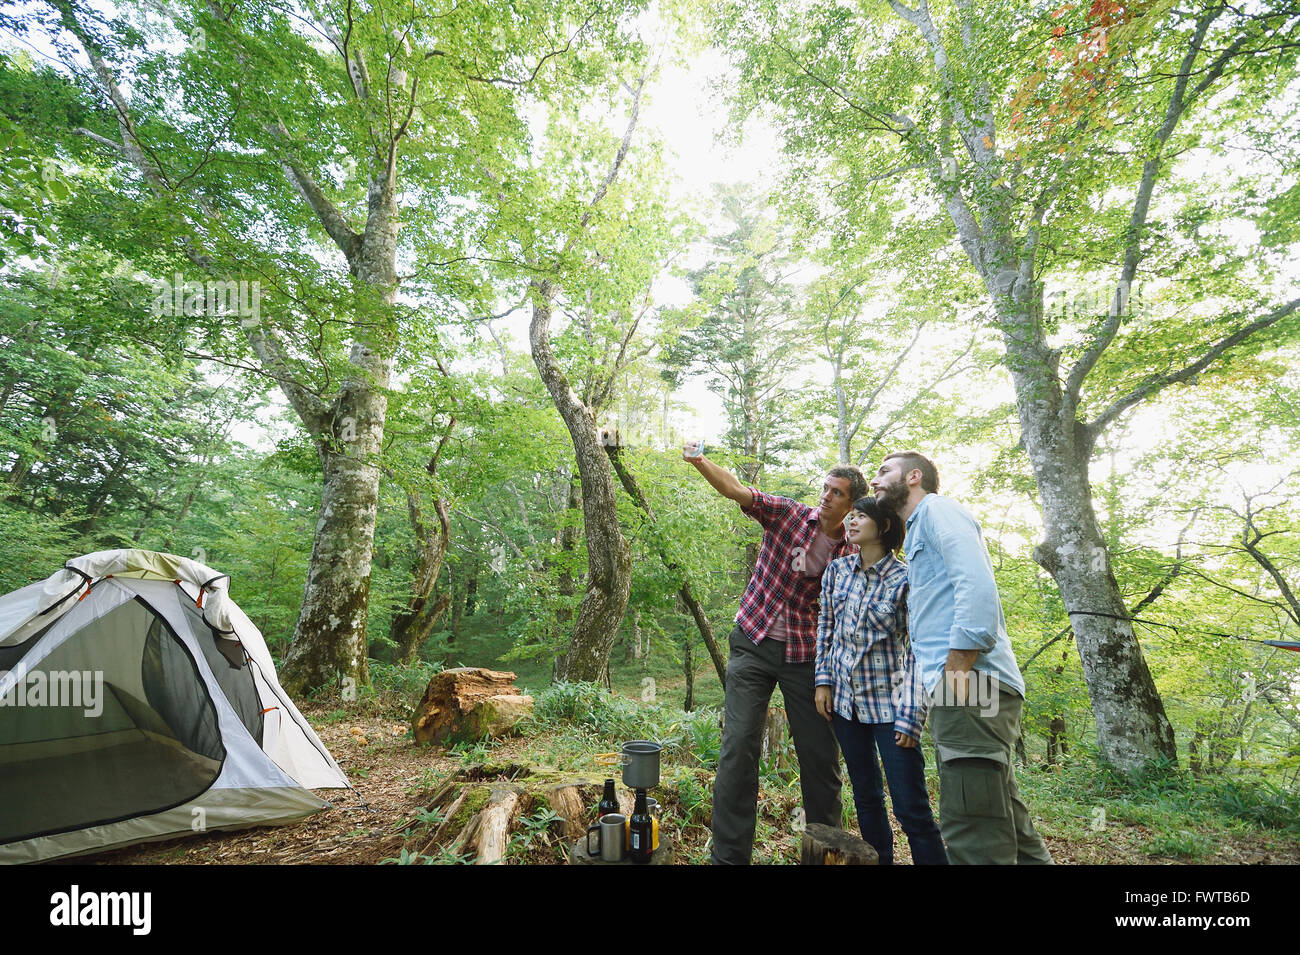 Multi-ethnic group of friends taking selfie at a camp site Stock Photo